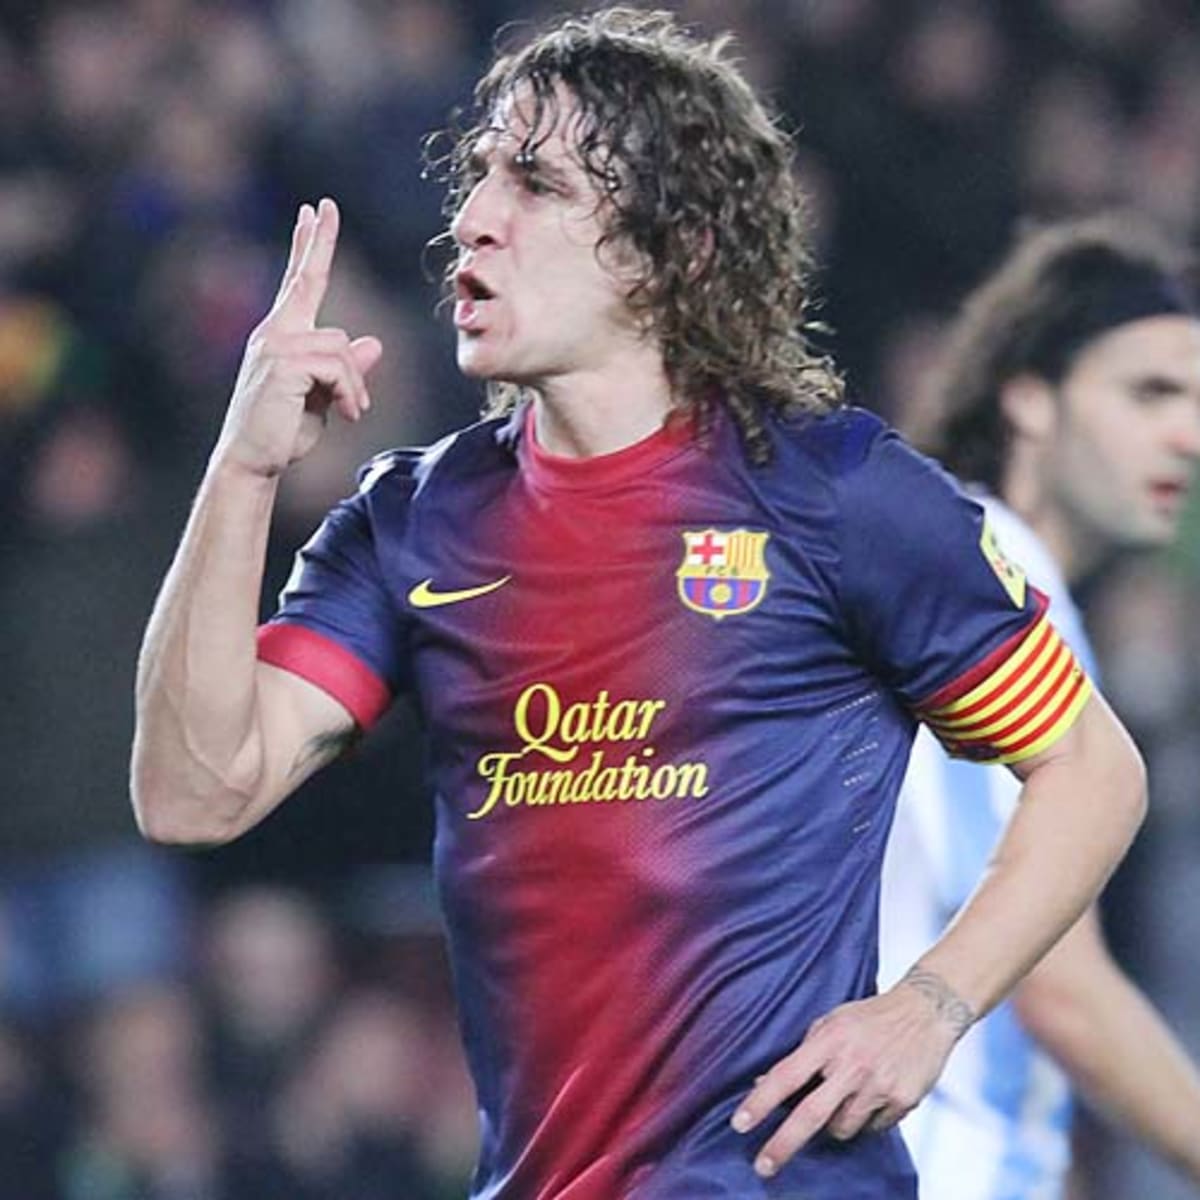 Barcelona defender Carles signs 3-year extension - Sports Illustrated